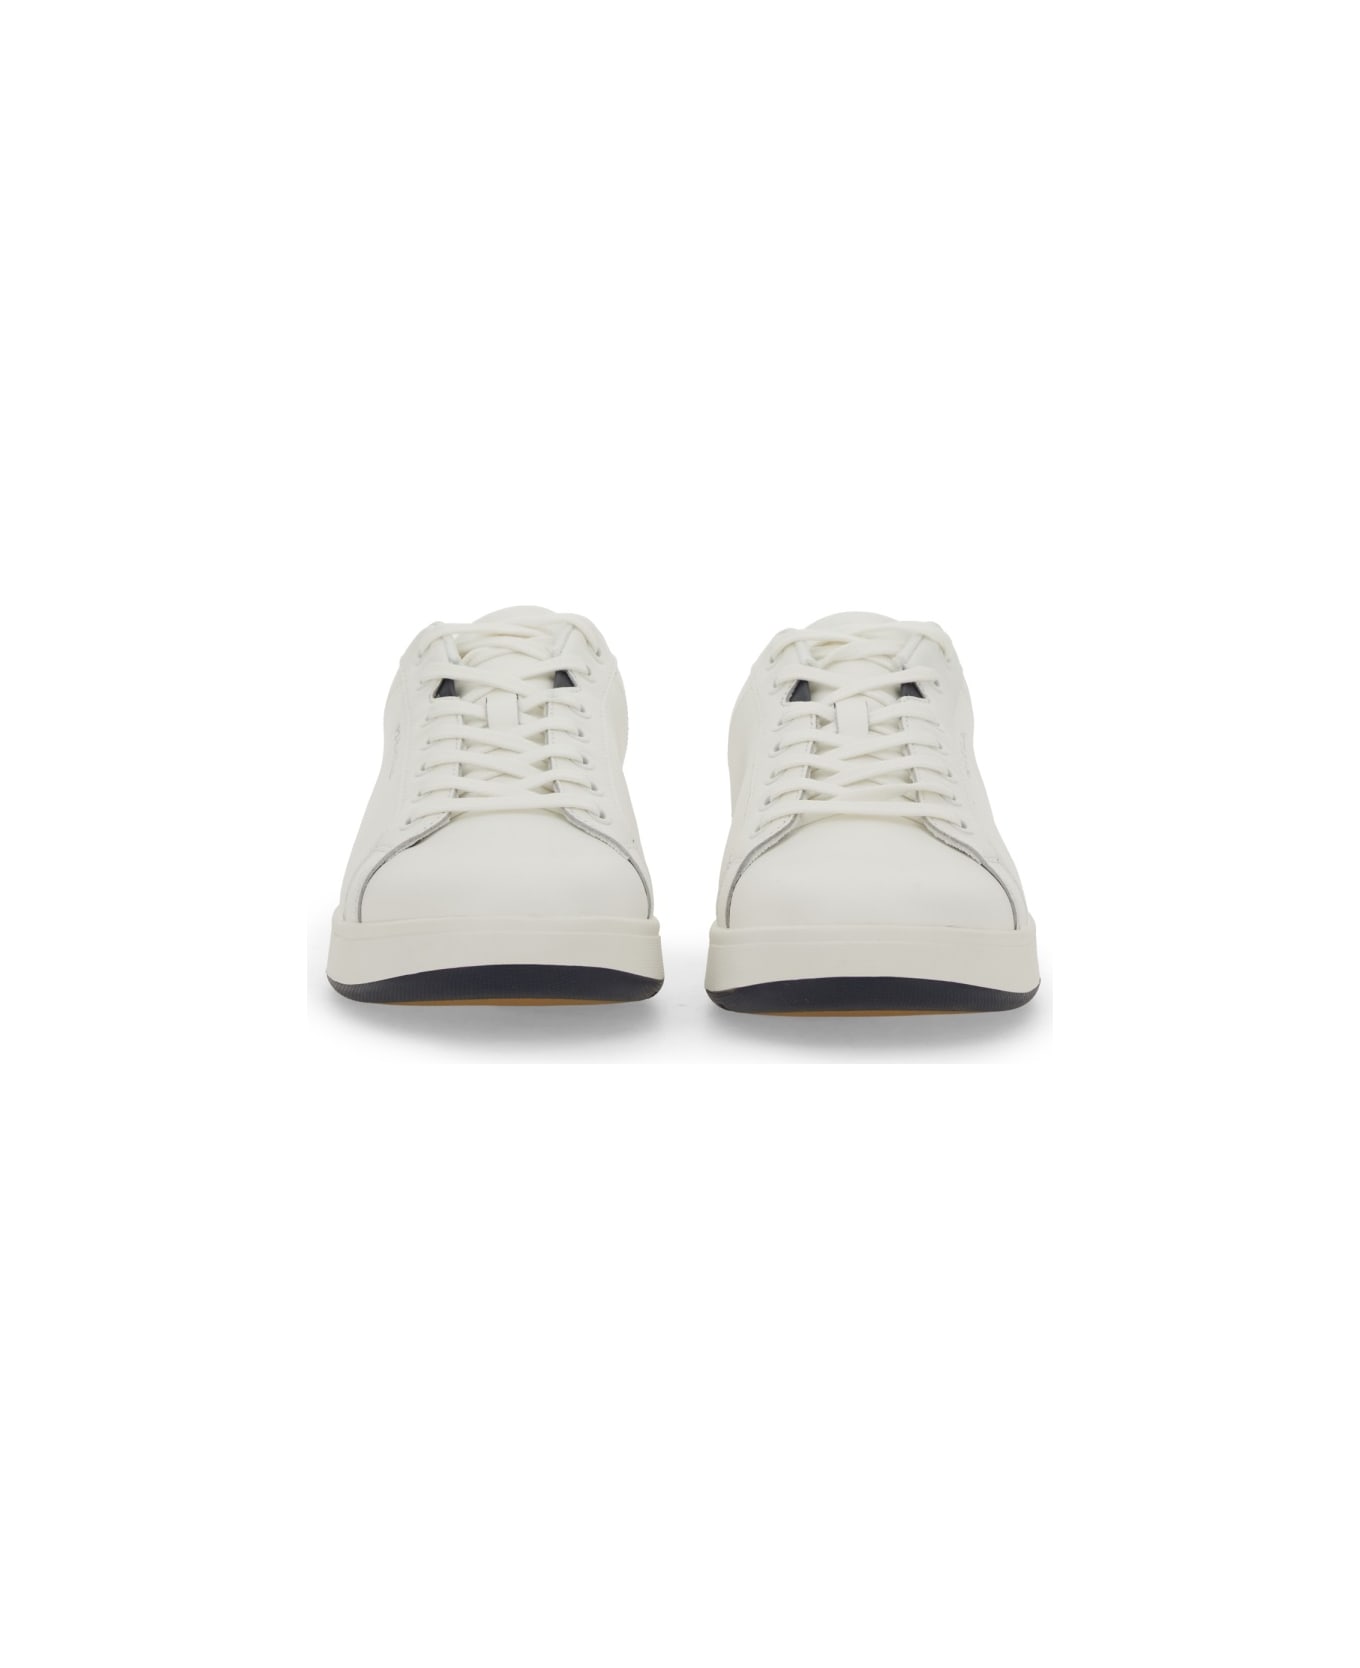 PS by Paul Smith "albany" Sneaker - WHITE スニーカー